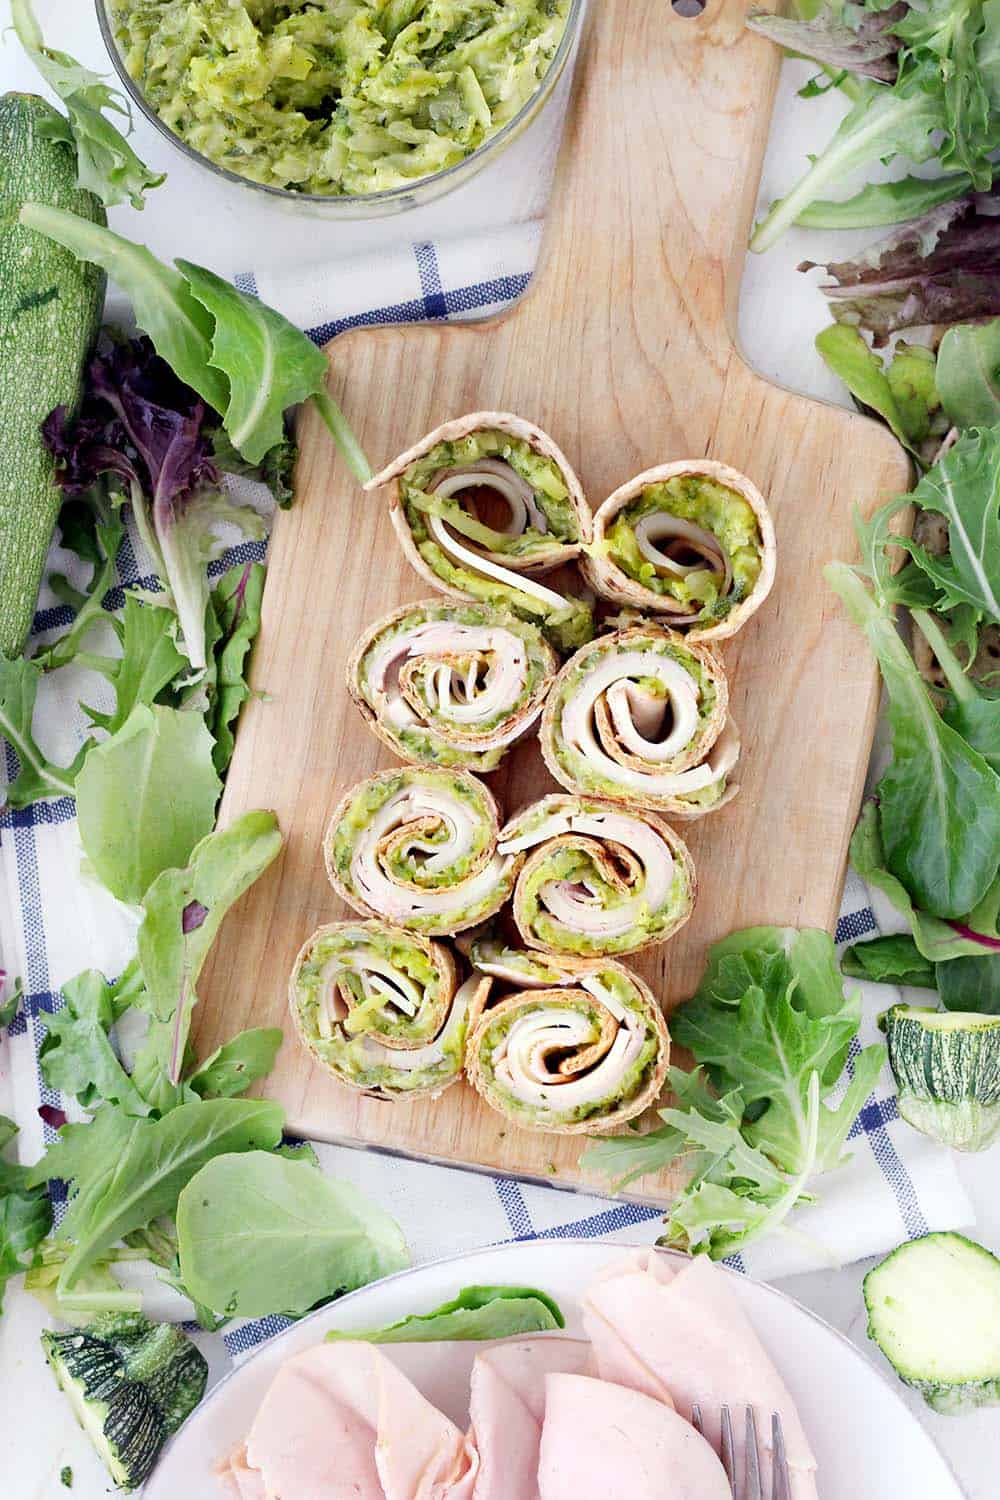 These Turkey Roll-Ups are spread with yummy, veggie-packed Zucchini Butter instead of mayo for an easy meal-prep sandwich for lunches all week long! Great for back-to-school and super kid friendly. Use any leftover zucchini butter in an omelette, as a dip, or to stuff chicken breasts.